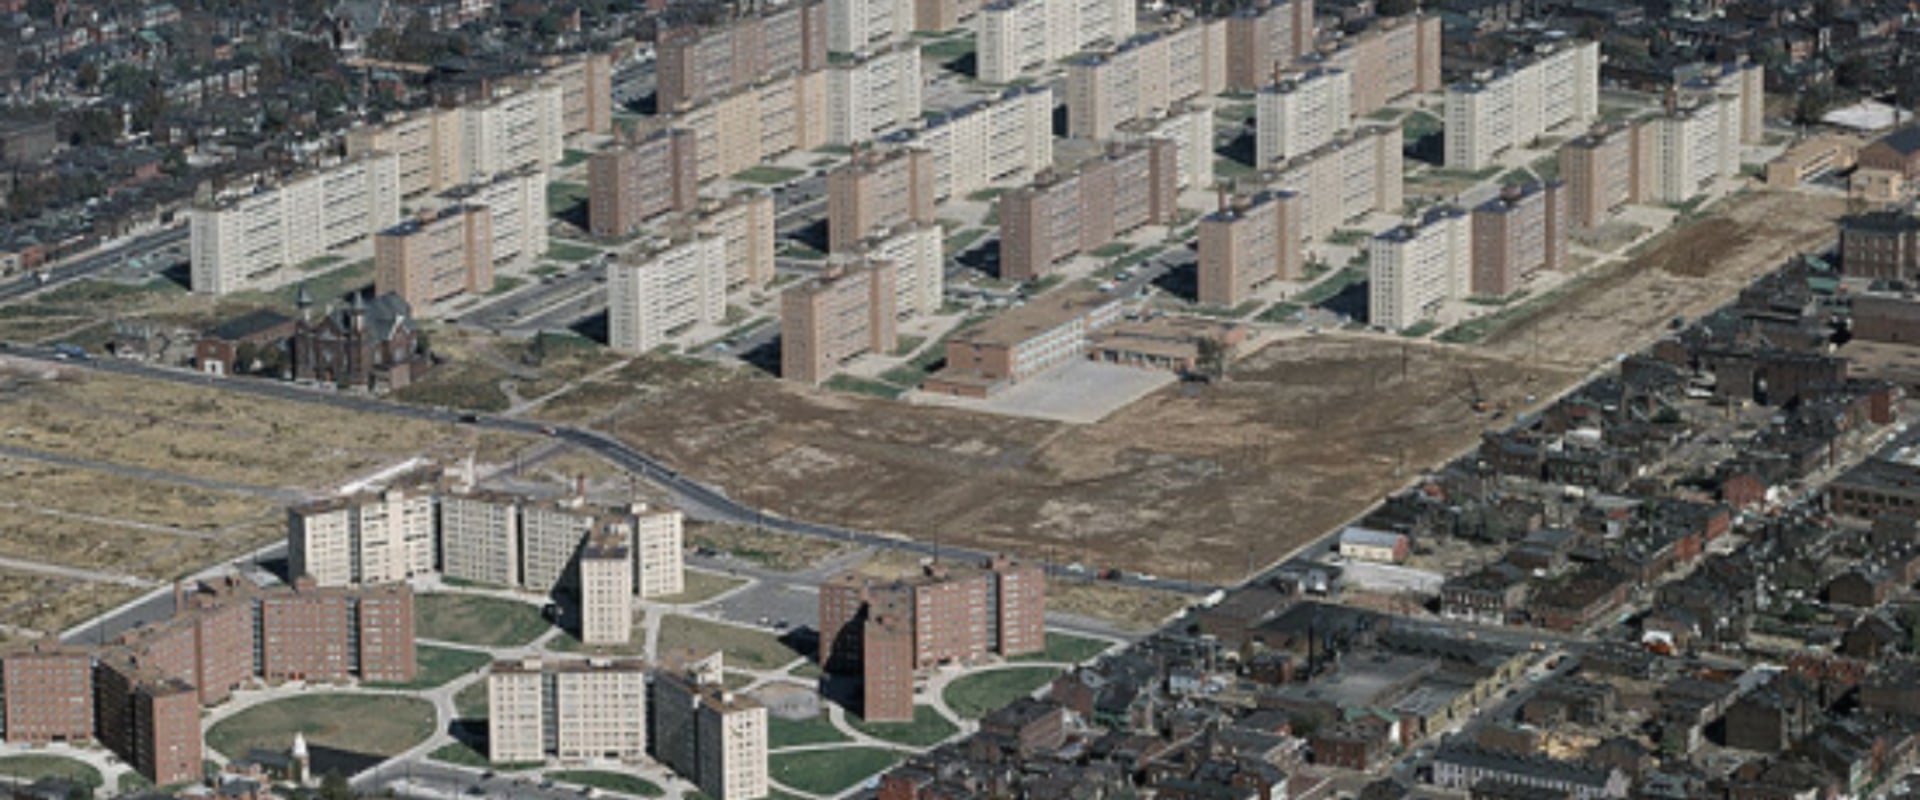 The 10 Most Dangerous Housing Projects in Baltimore: An Expert's Perspective